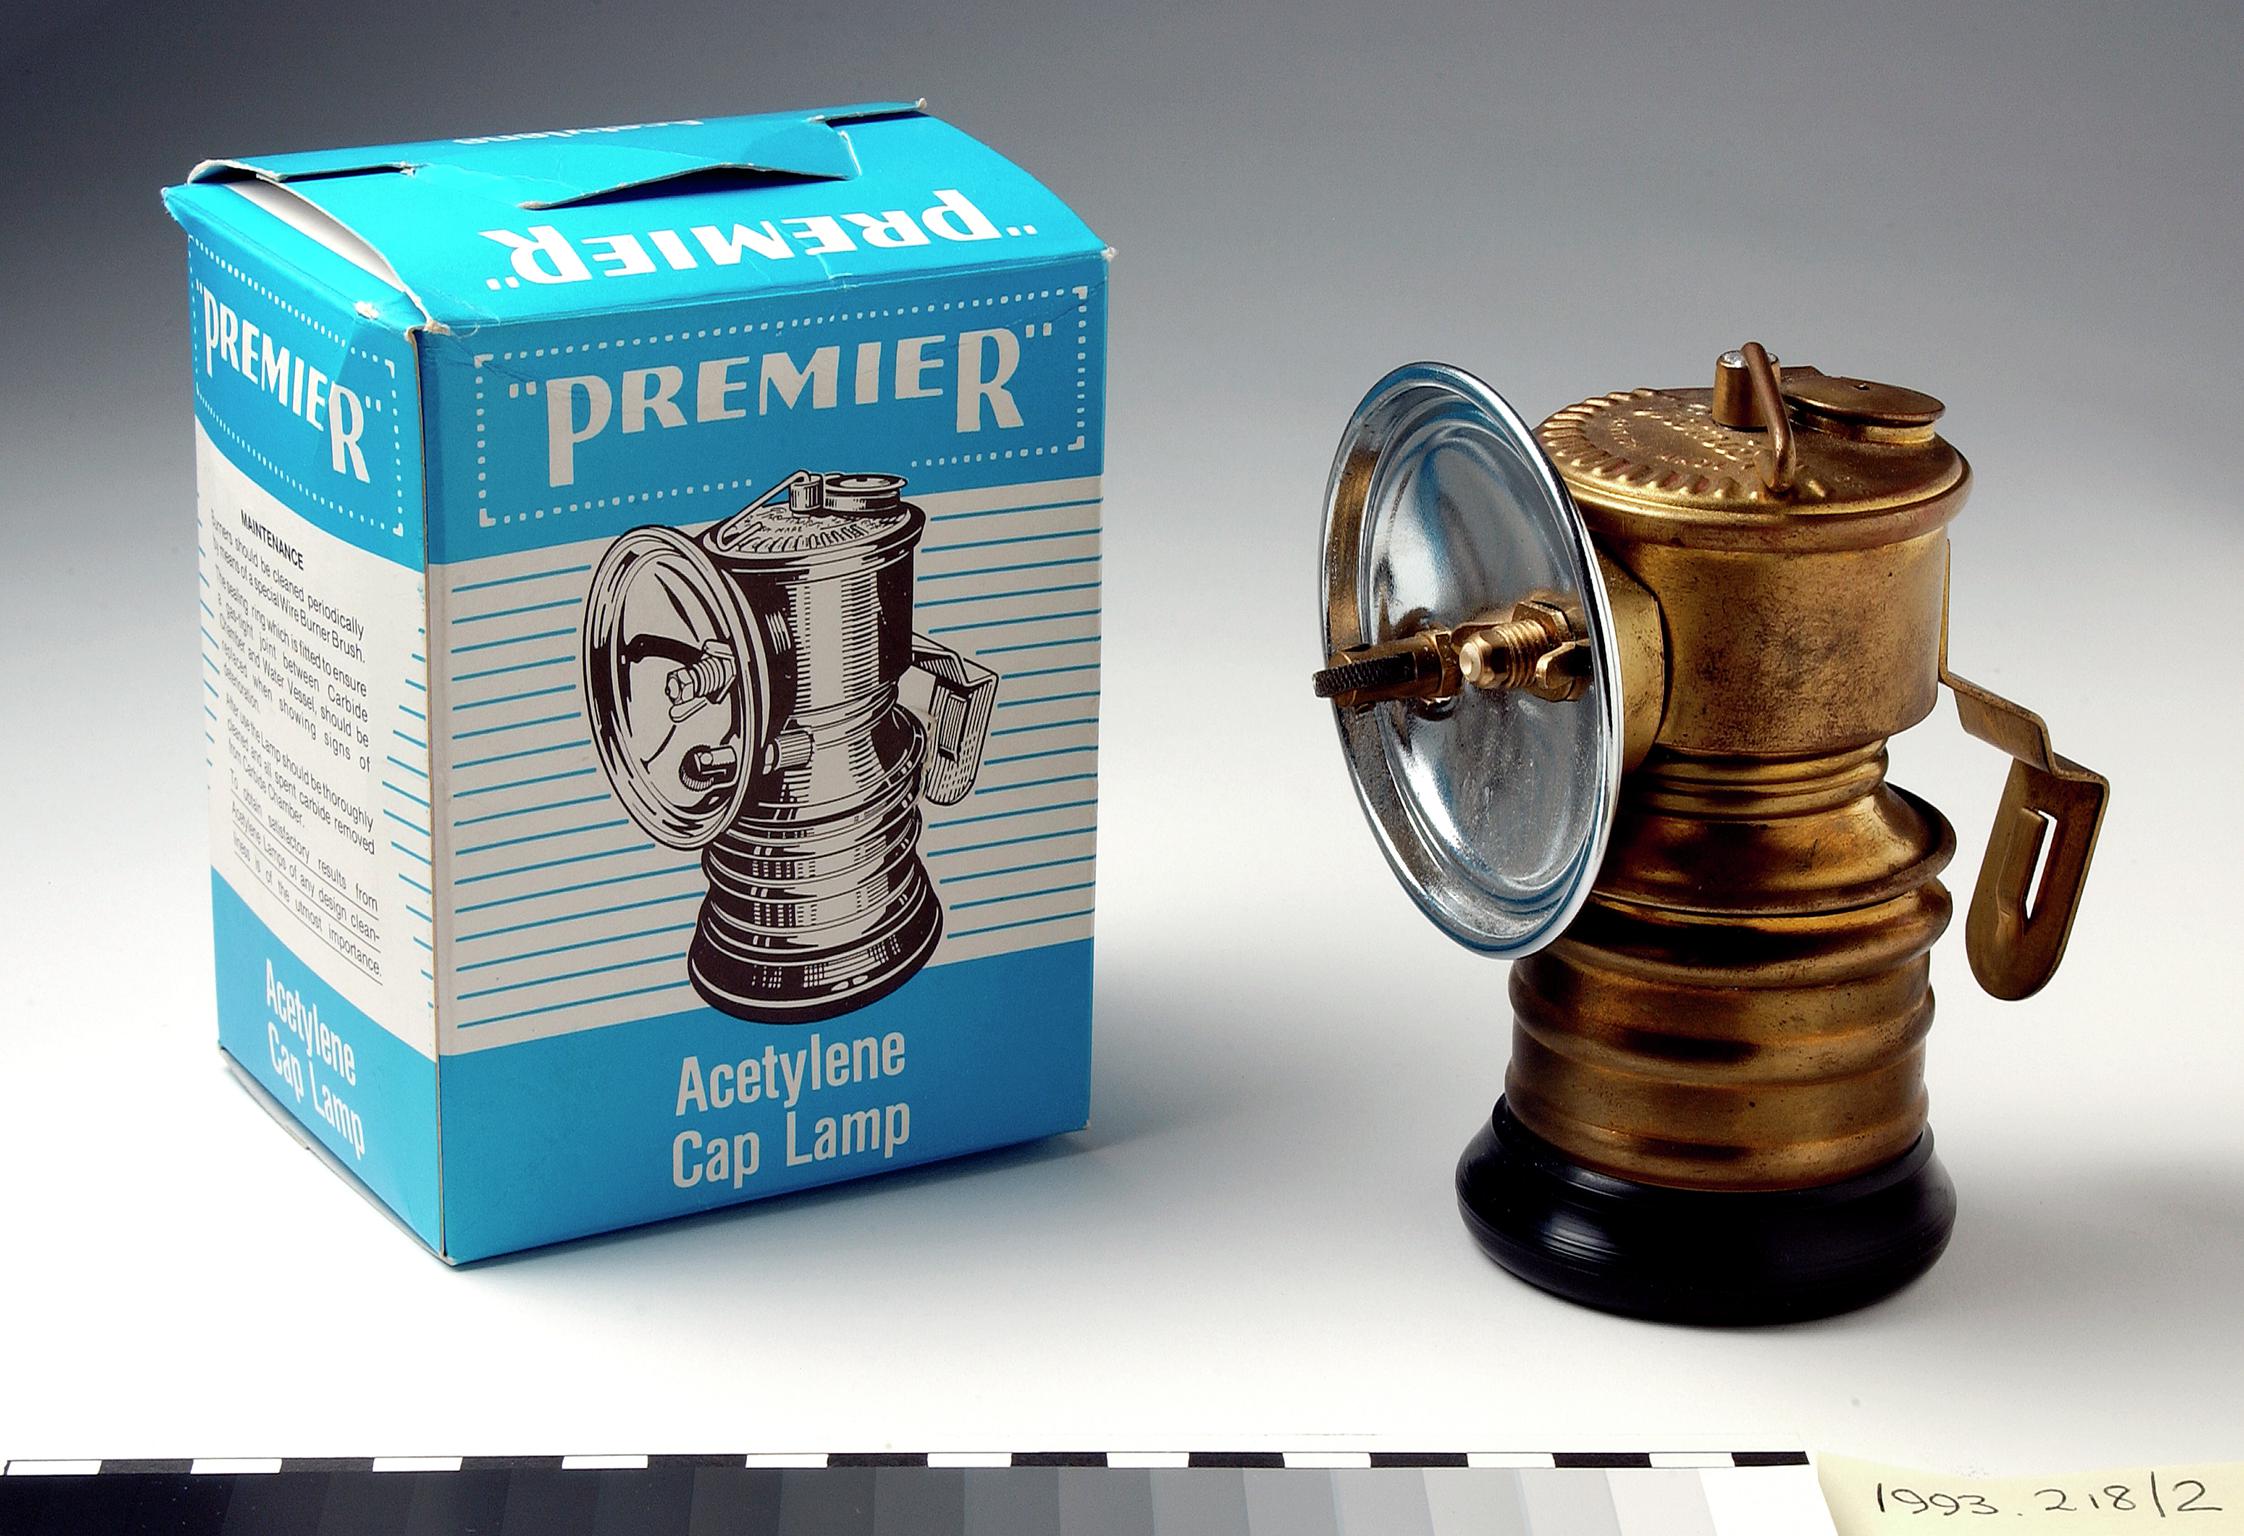 Miner's carbide cap lamp with box